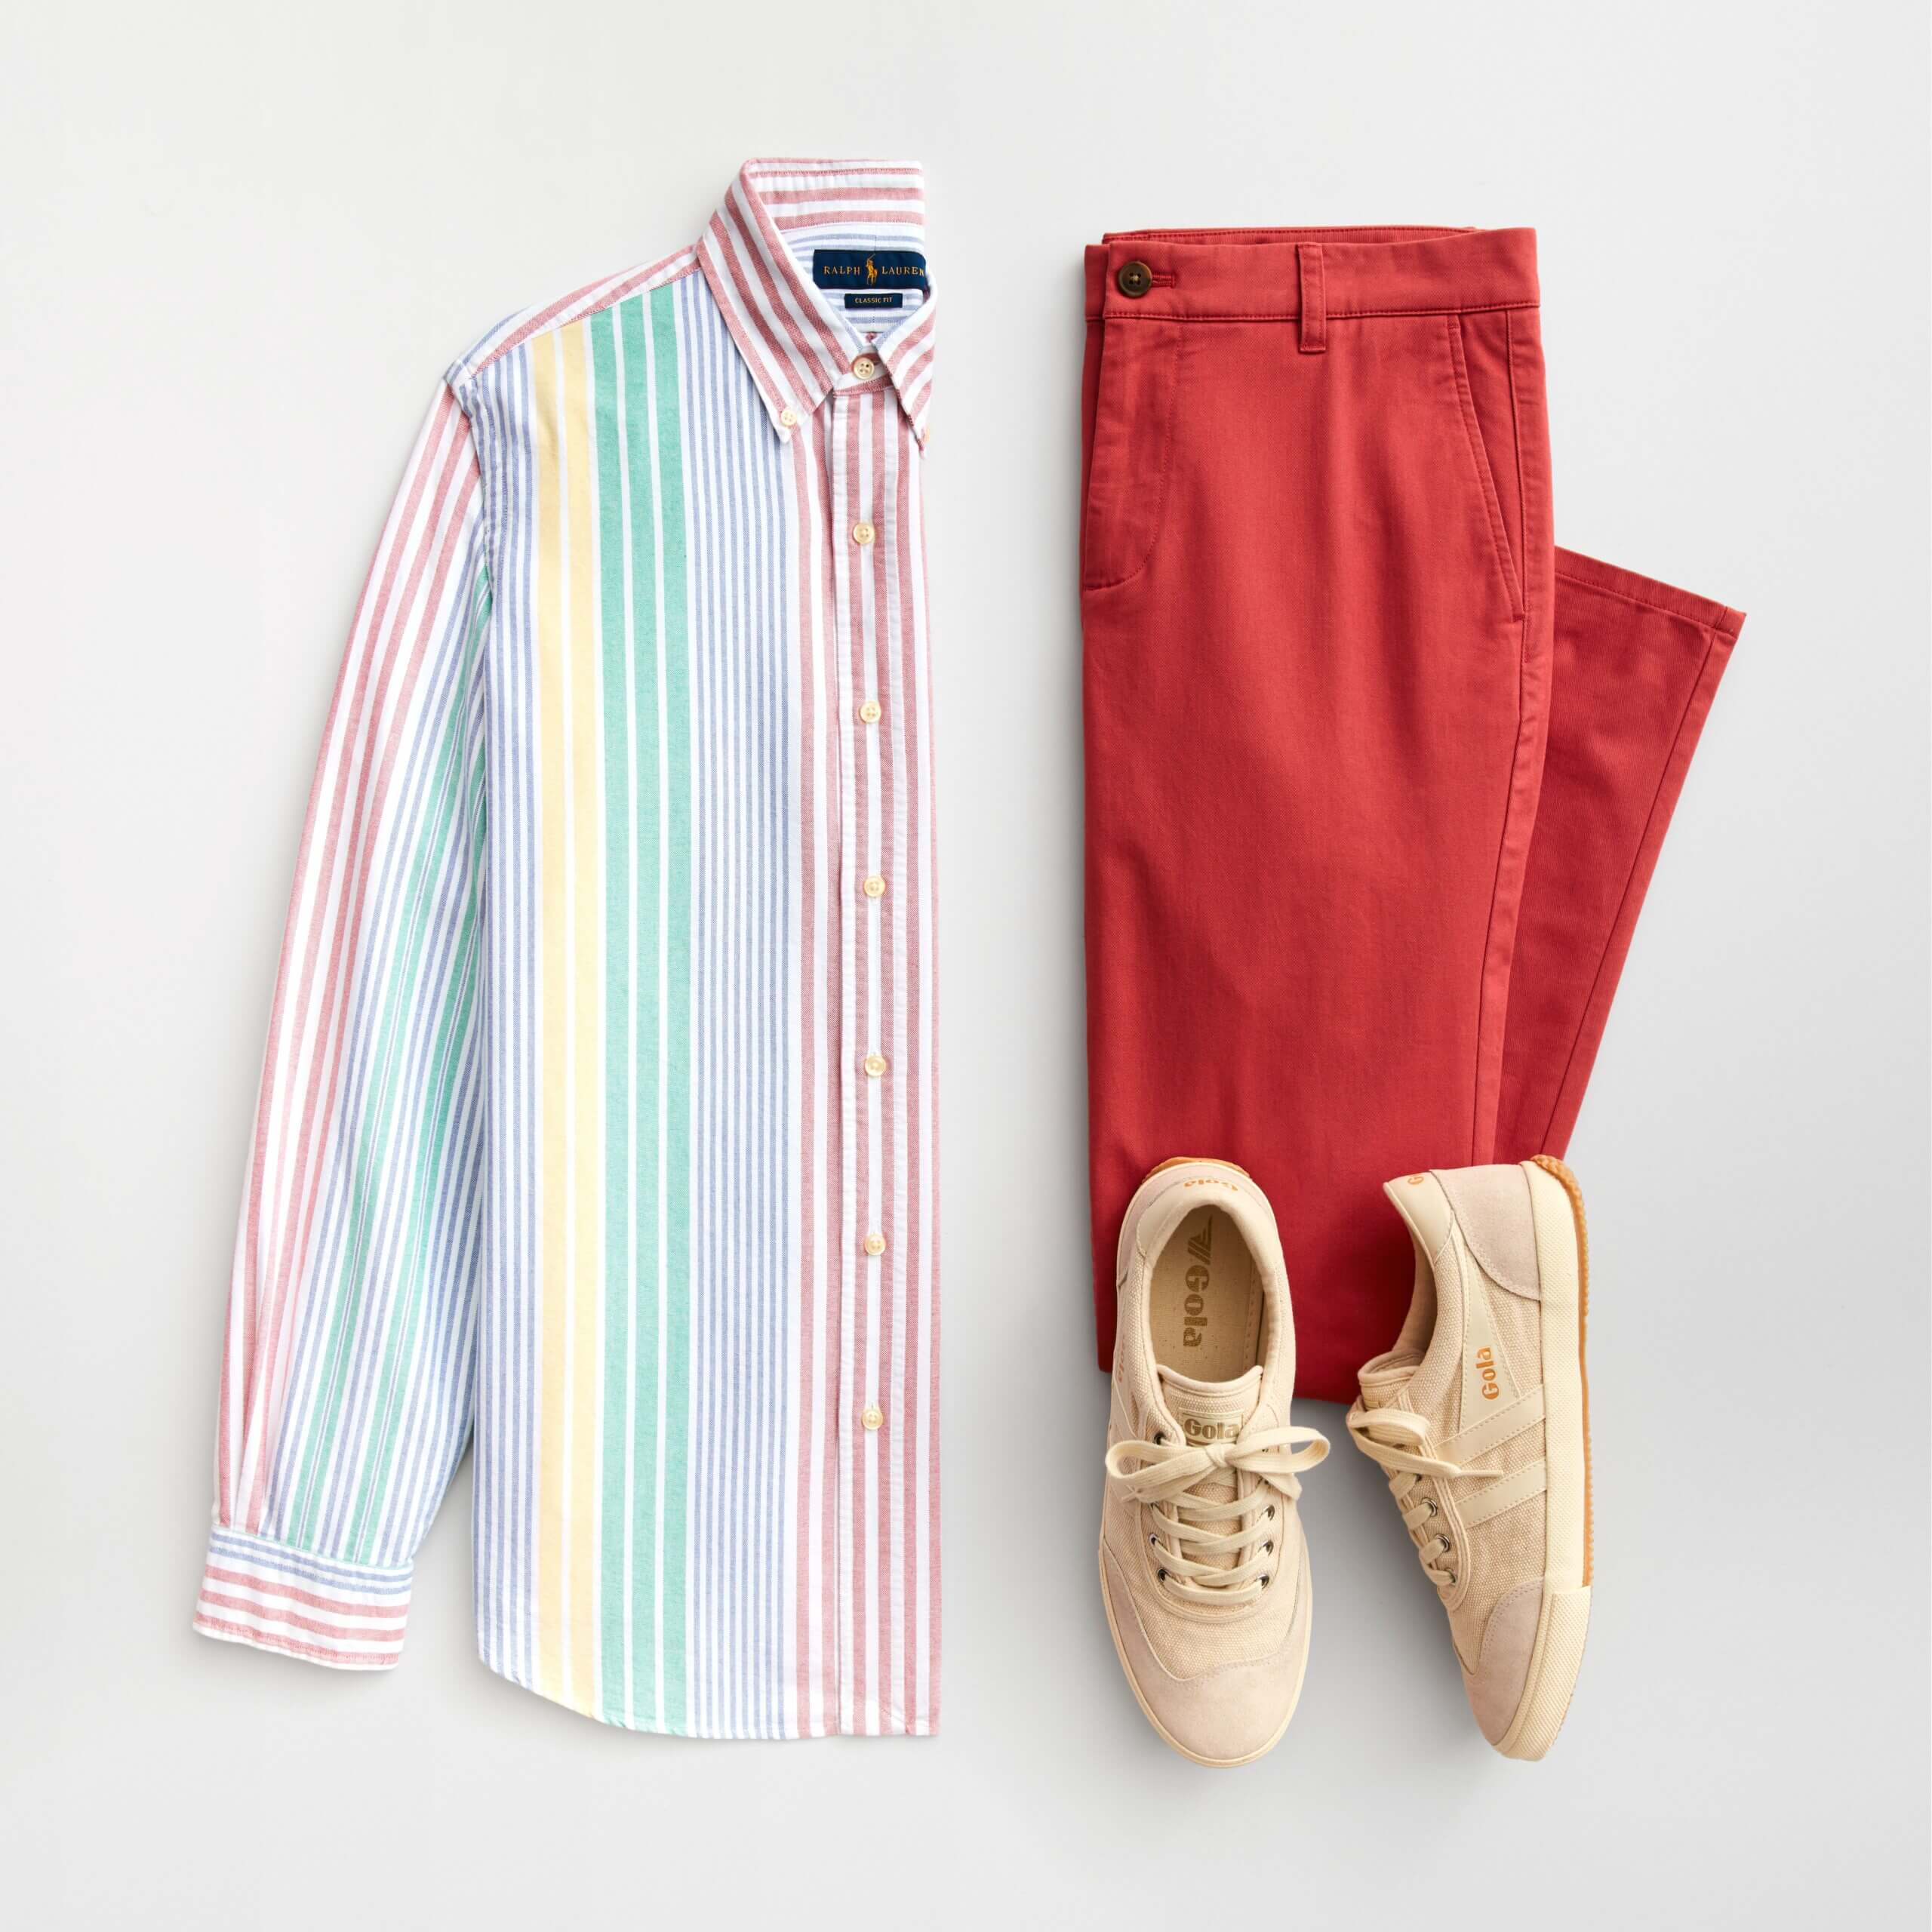 Stitch Fix men's outfit laydown featuring red chinos, beige sneakers and striped oxford shirt in red, green, yellow and white. 